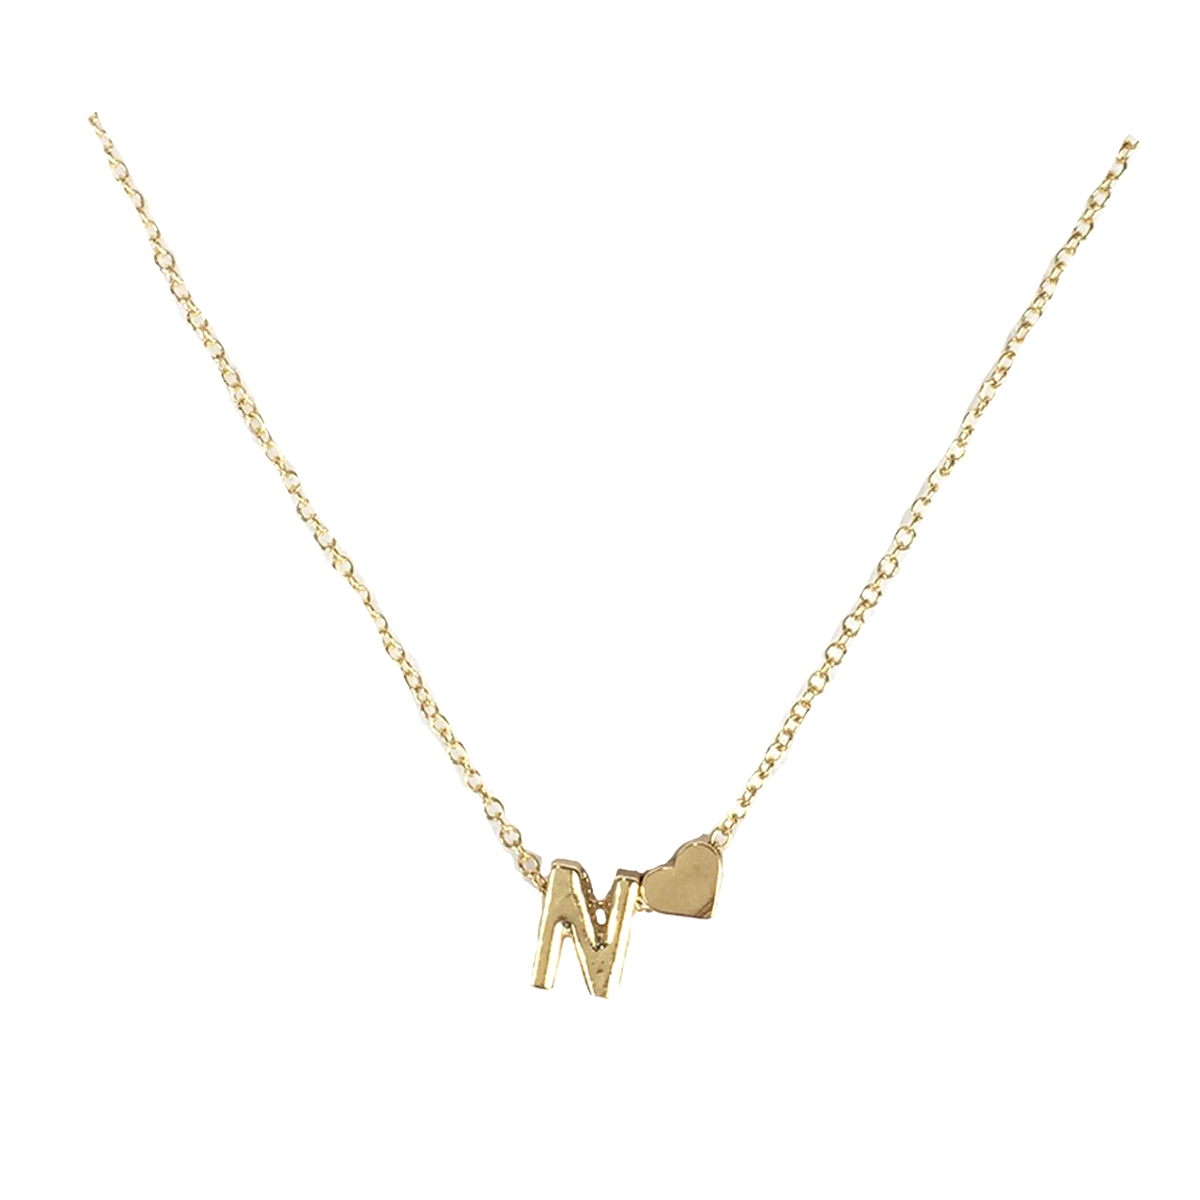 N Necklace / Gold Initial Necklace | Linjer Jewelry